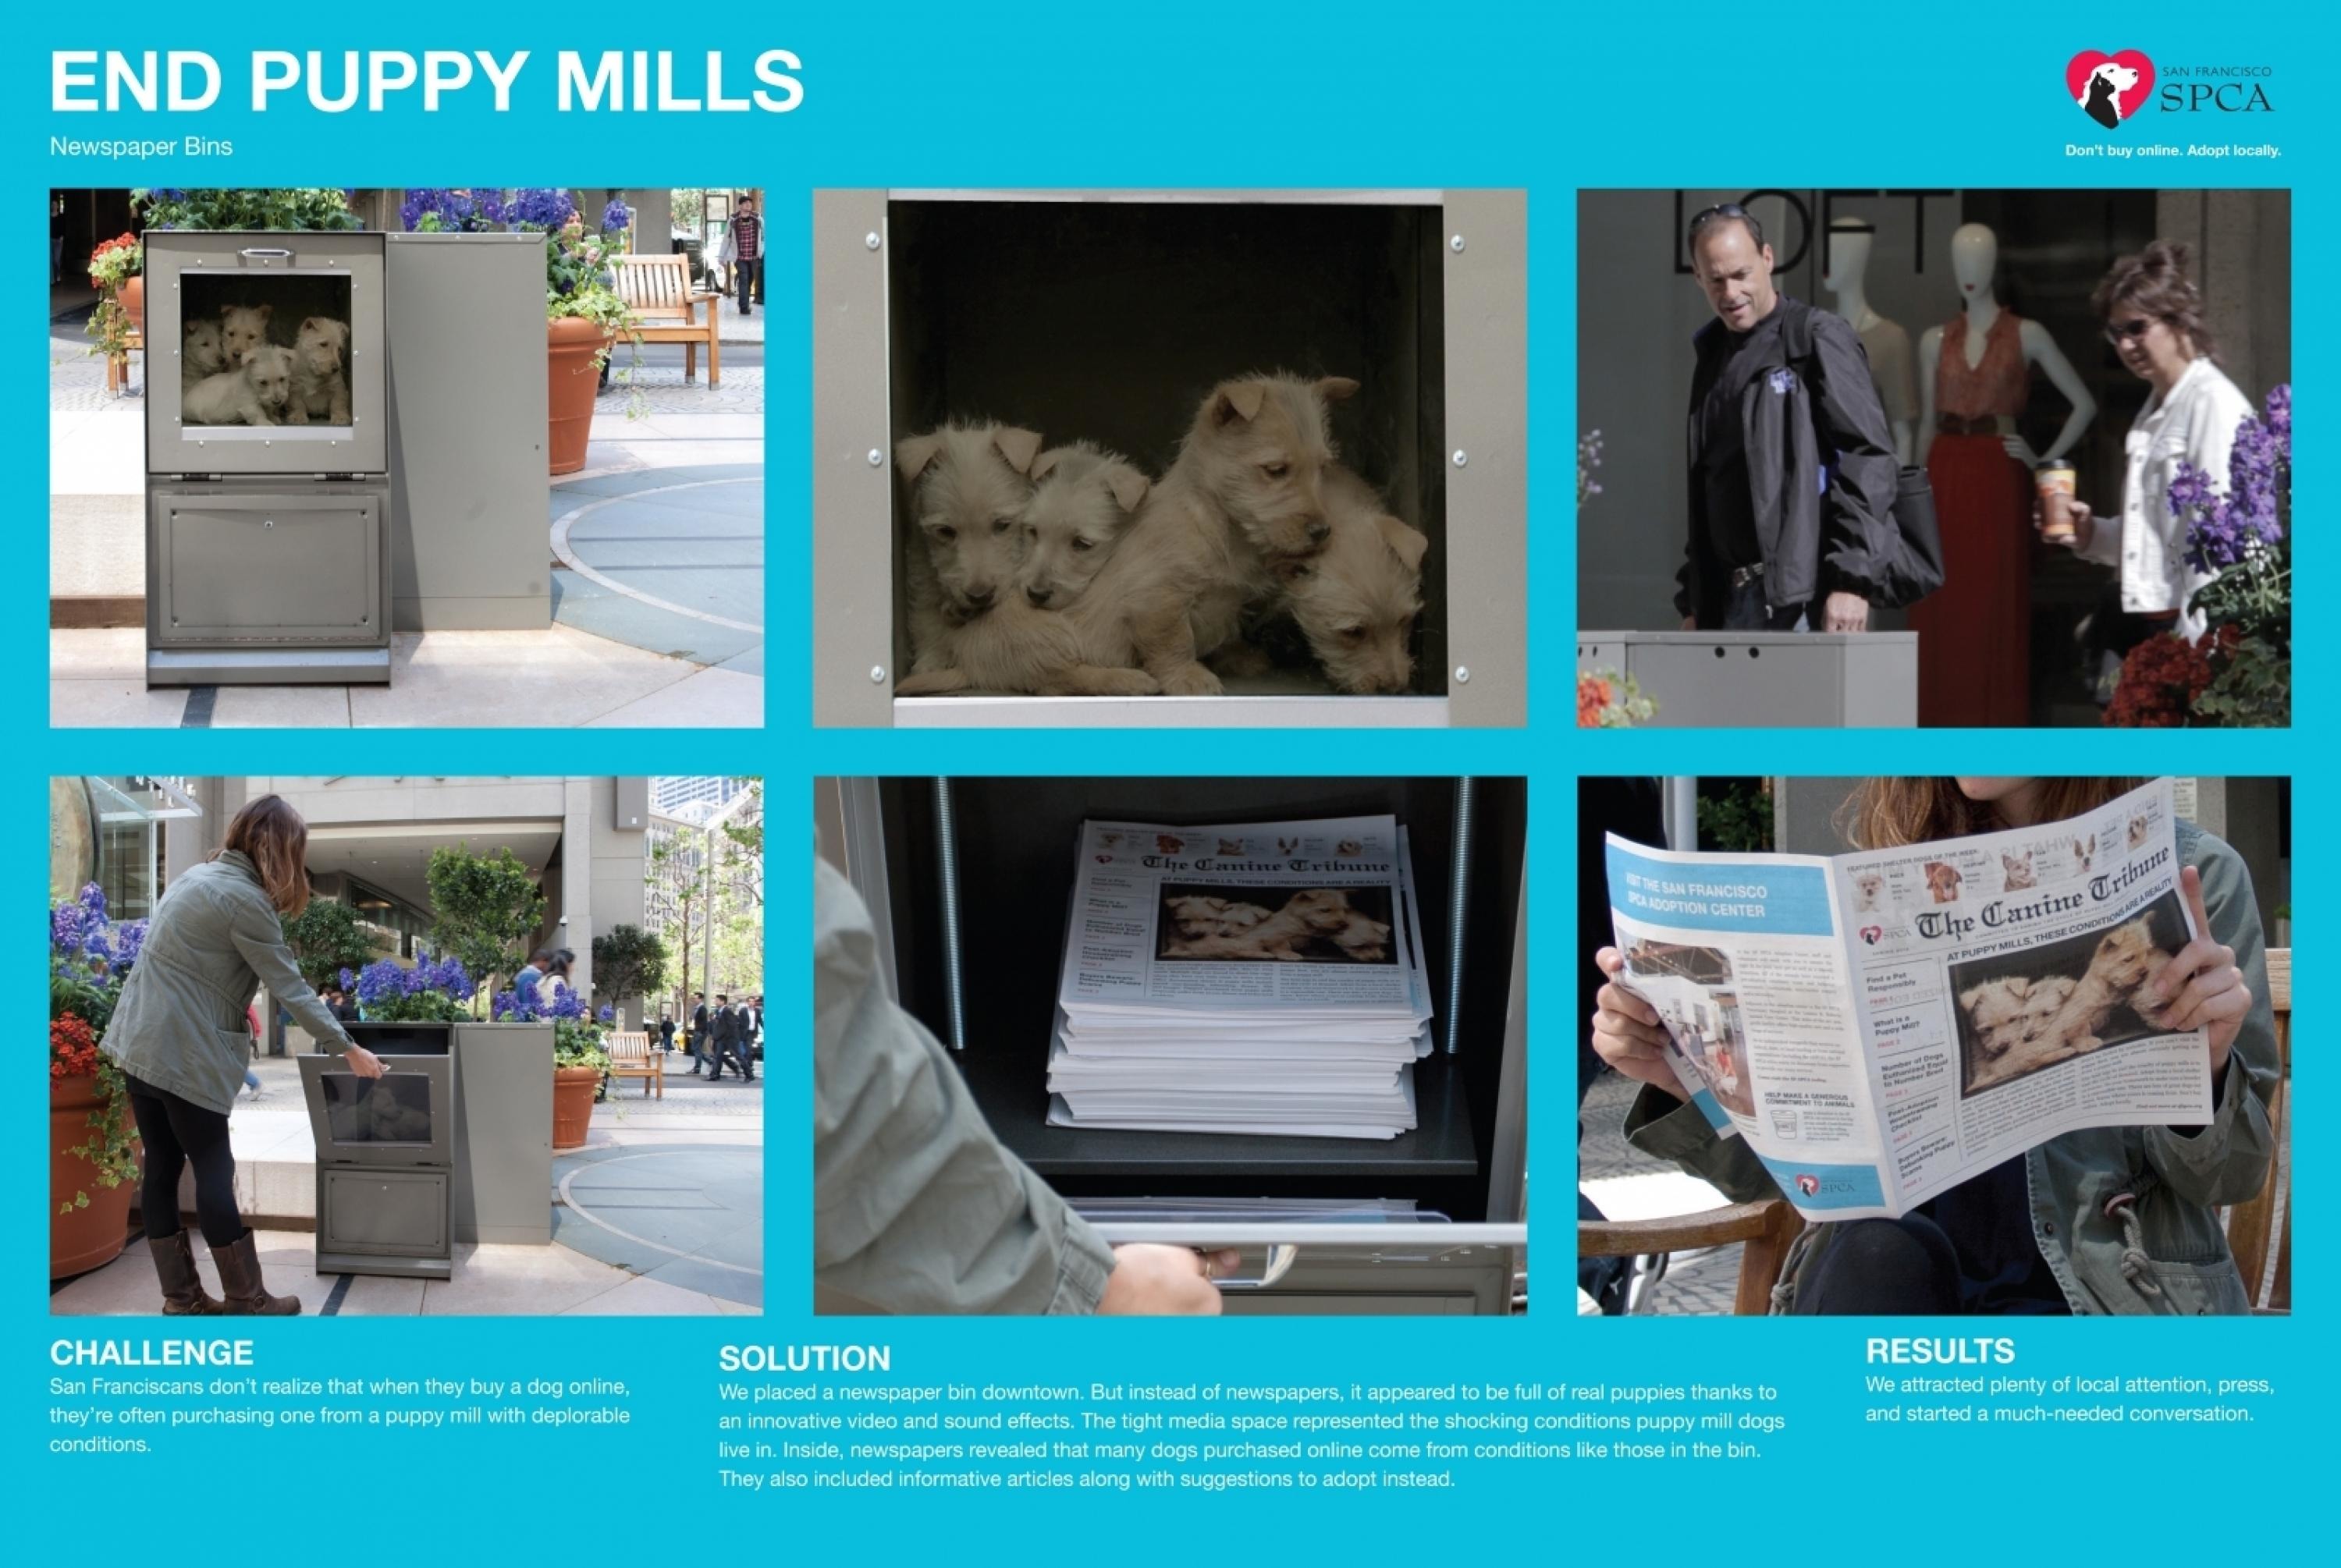 END PUPPY MILLS - NEWSPAPERS